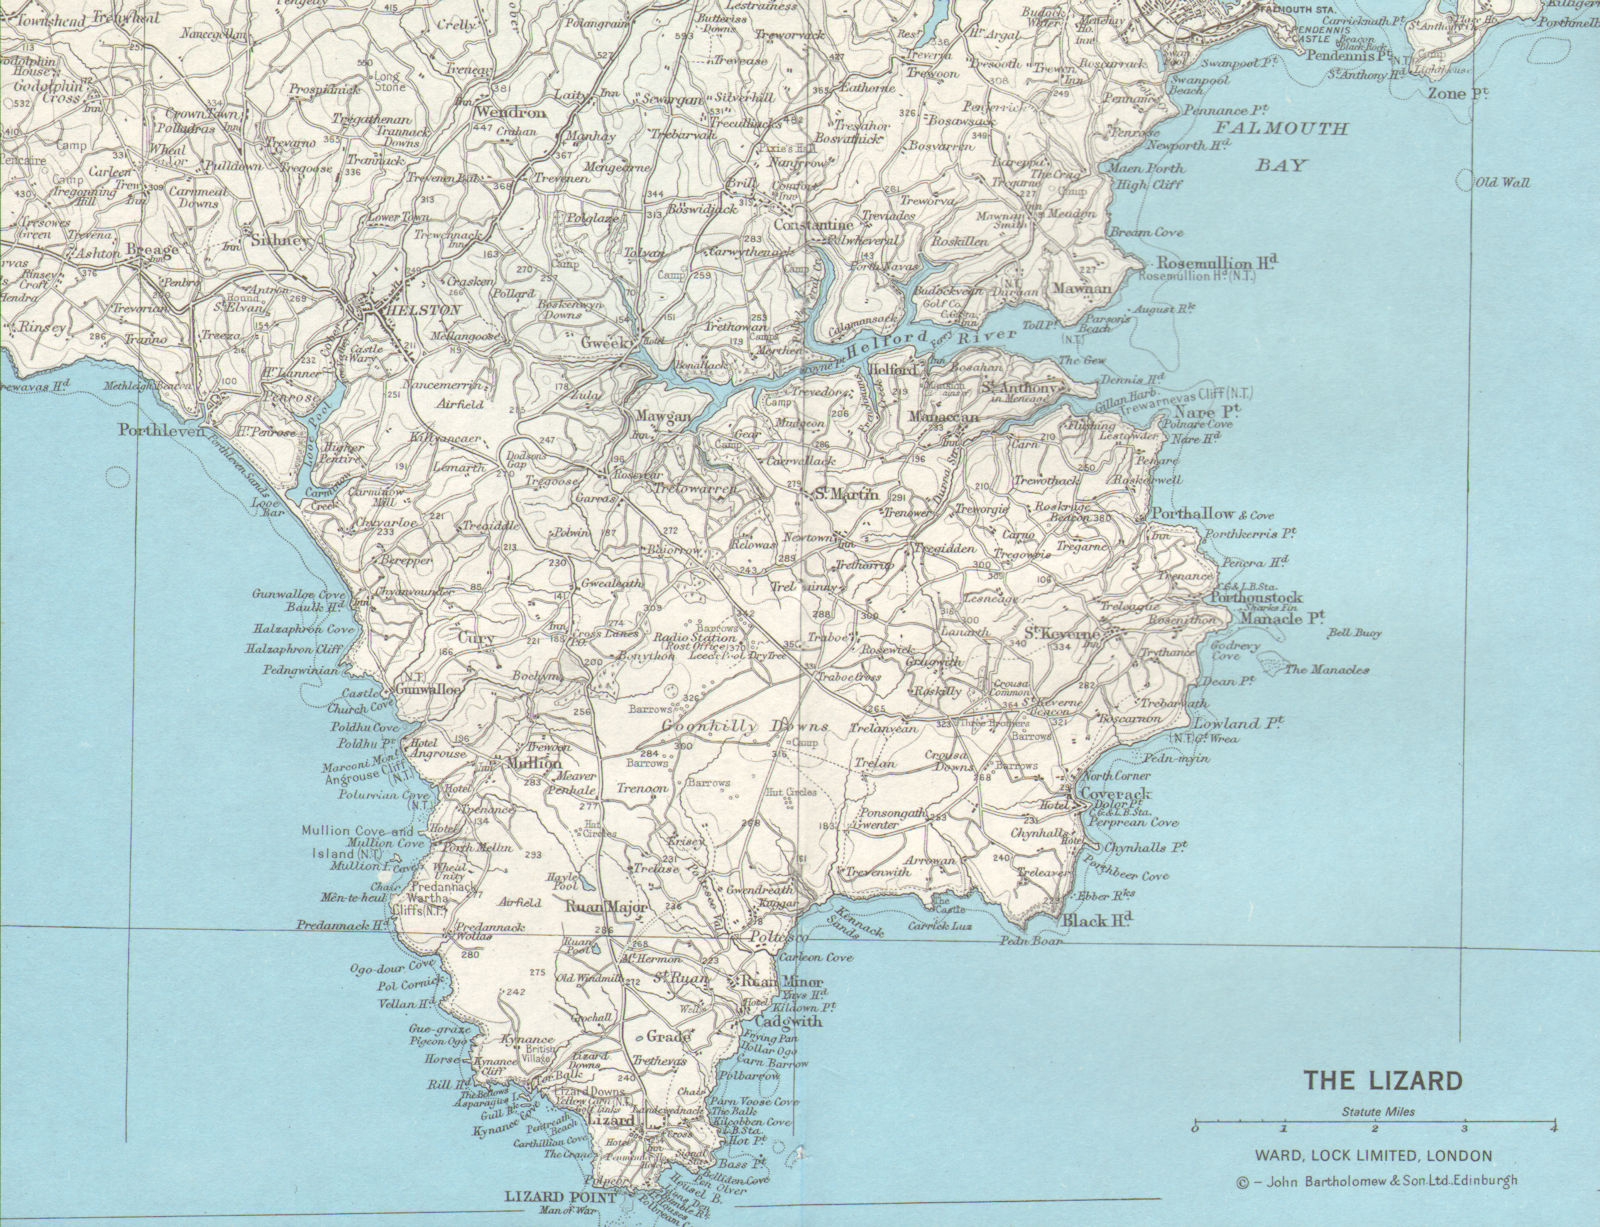 THE LIZARD South Cornwall Helford River Helston Falmouth Bay Porthleven 1971 map